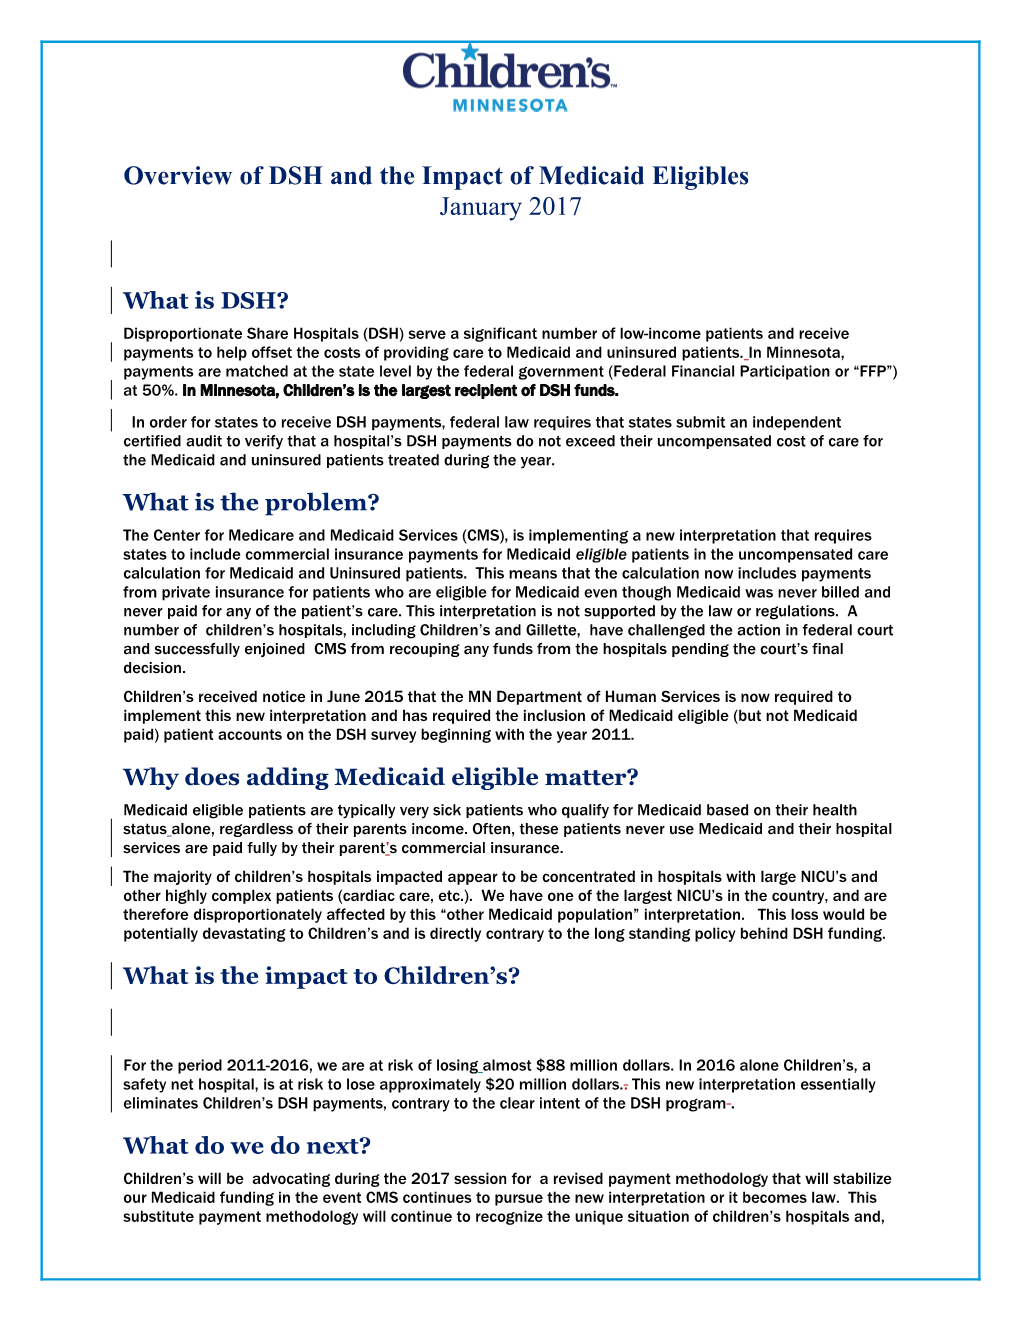 Overview of DSH and the Impact of Medicaid Eligibles